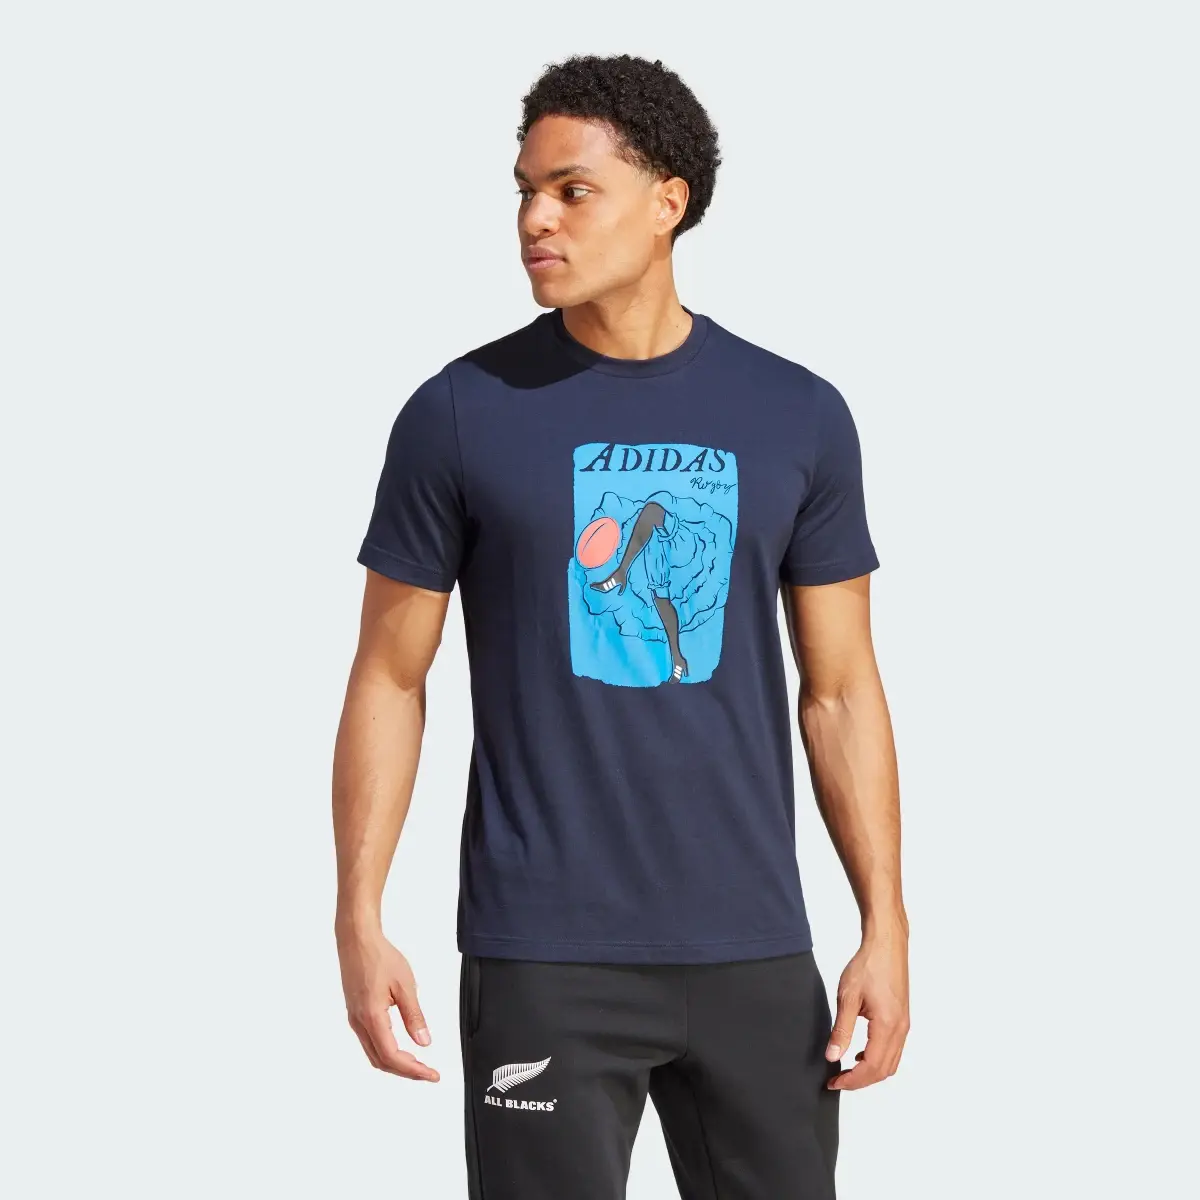 Adidas Rugby Cancan Graphic T-Shirt. 2